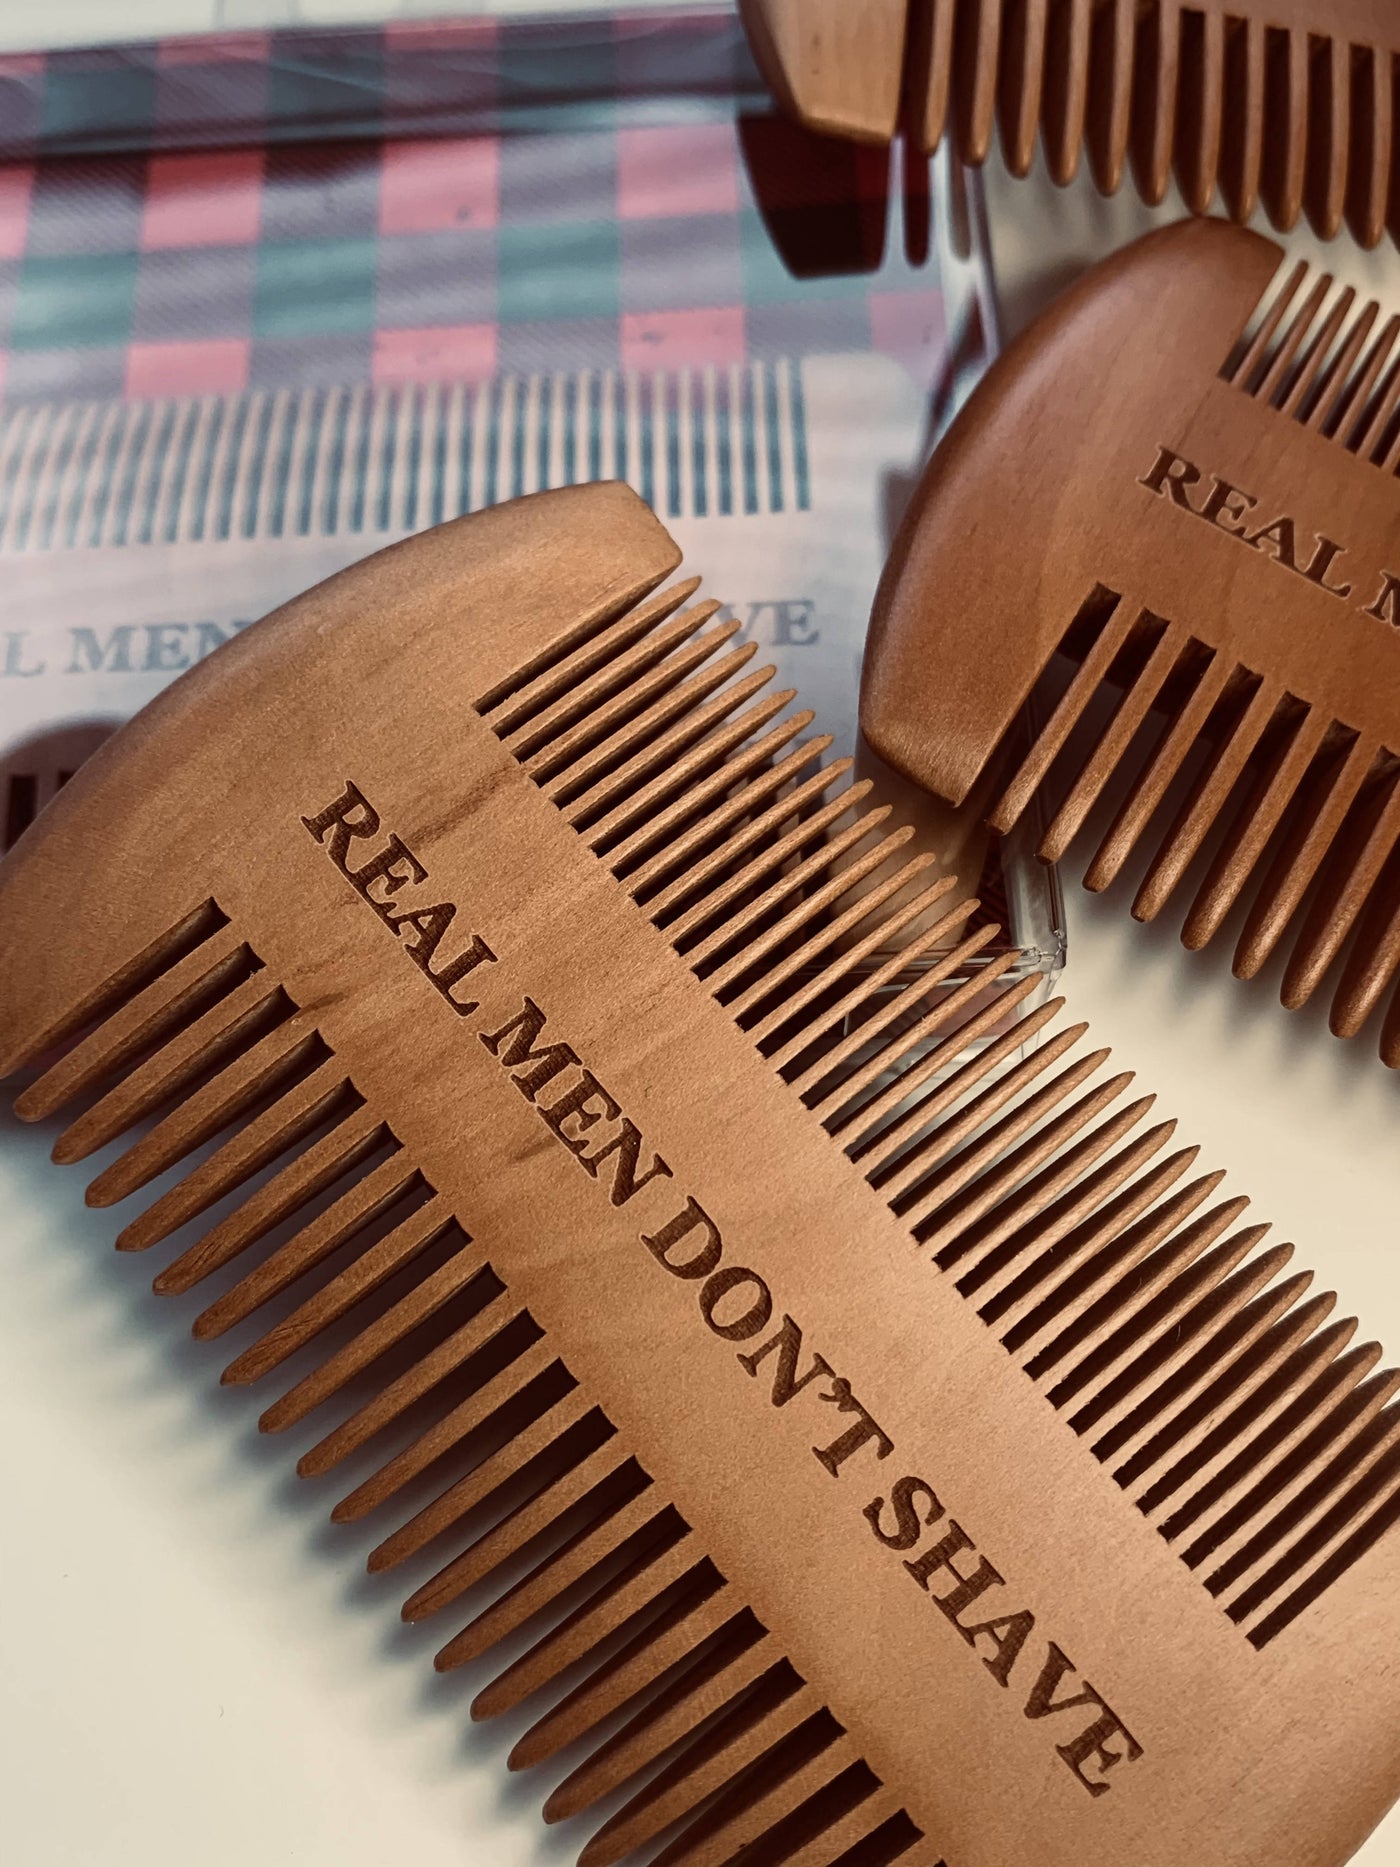 Real Men Don't Shave Beard Comb